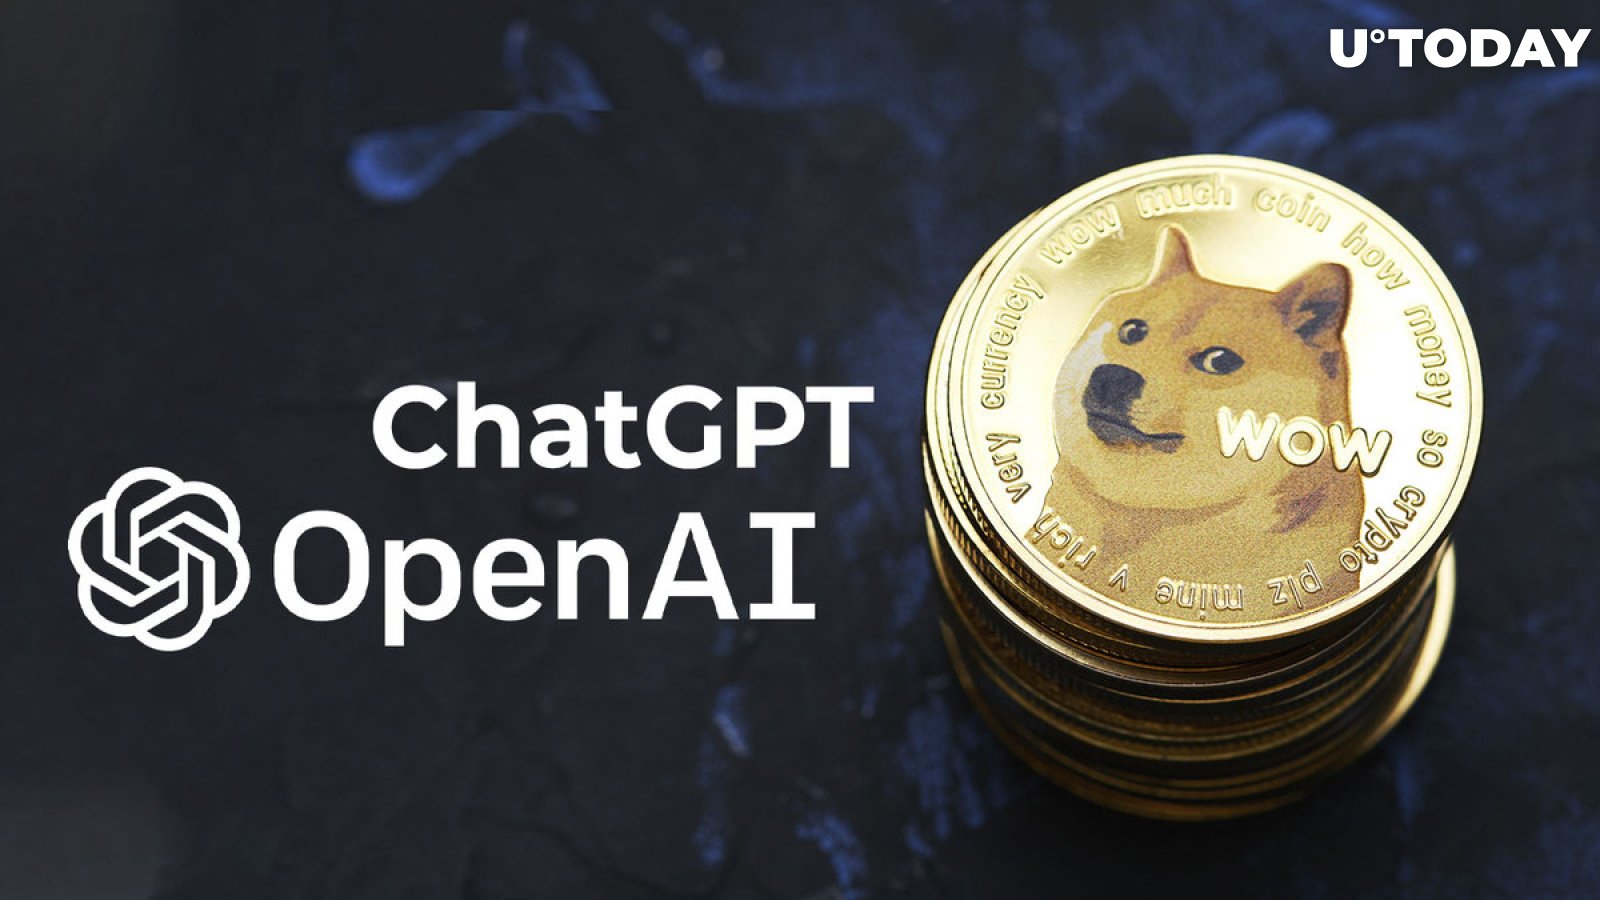 Dogecoin (DOGE) Copycat Created by Overhyped AI ChatGPT